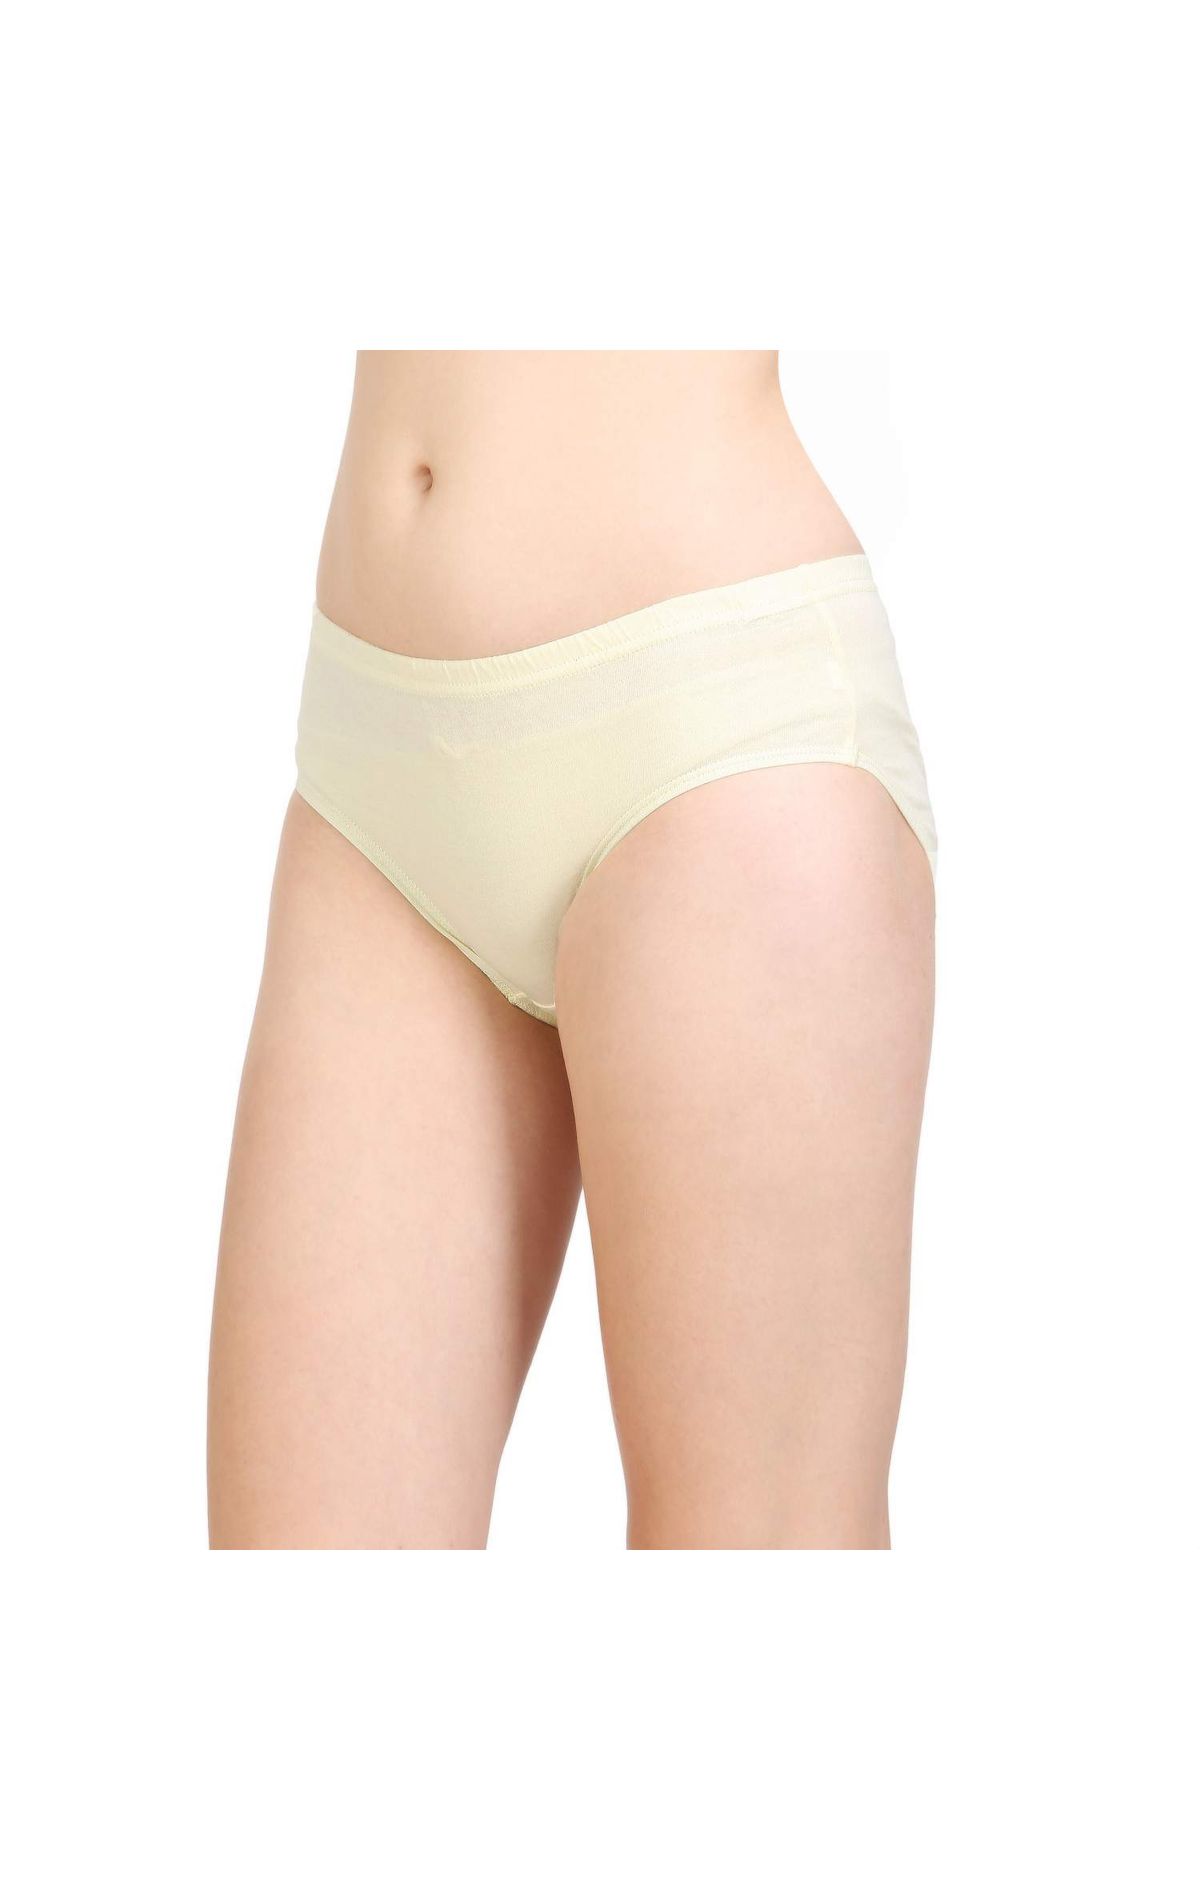 Buy BODYCARE Pack of 6 100% Cotton Classic Panties in E2CD - Multi-Color  online